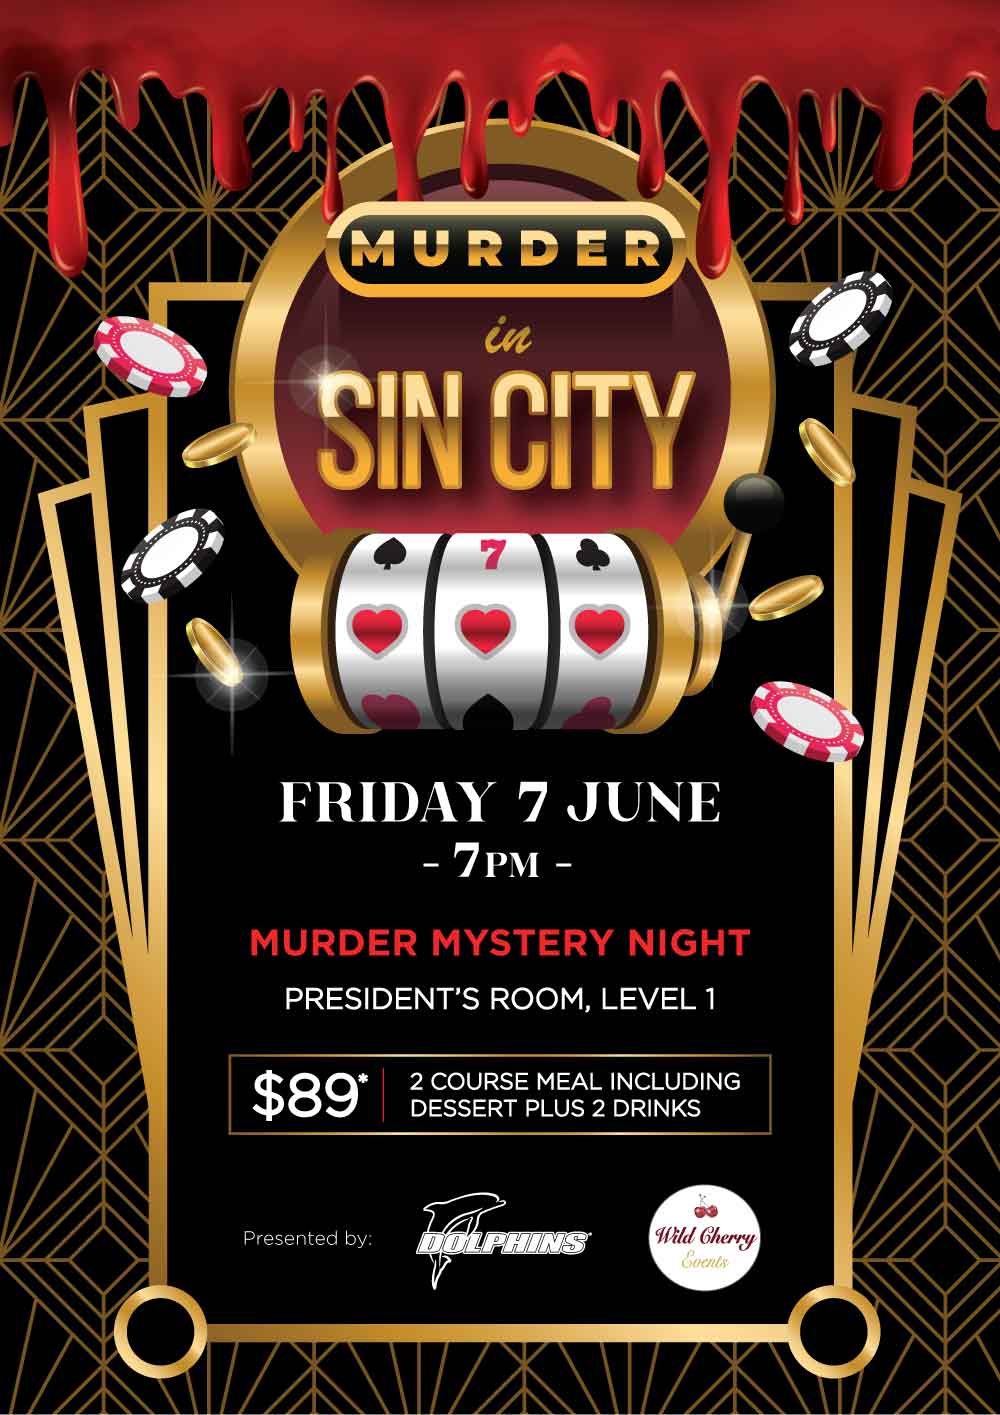 Sin City Murder Mystery Night at Redcliffe Leagues Club